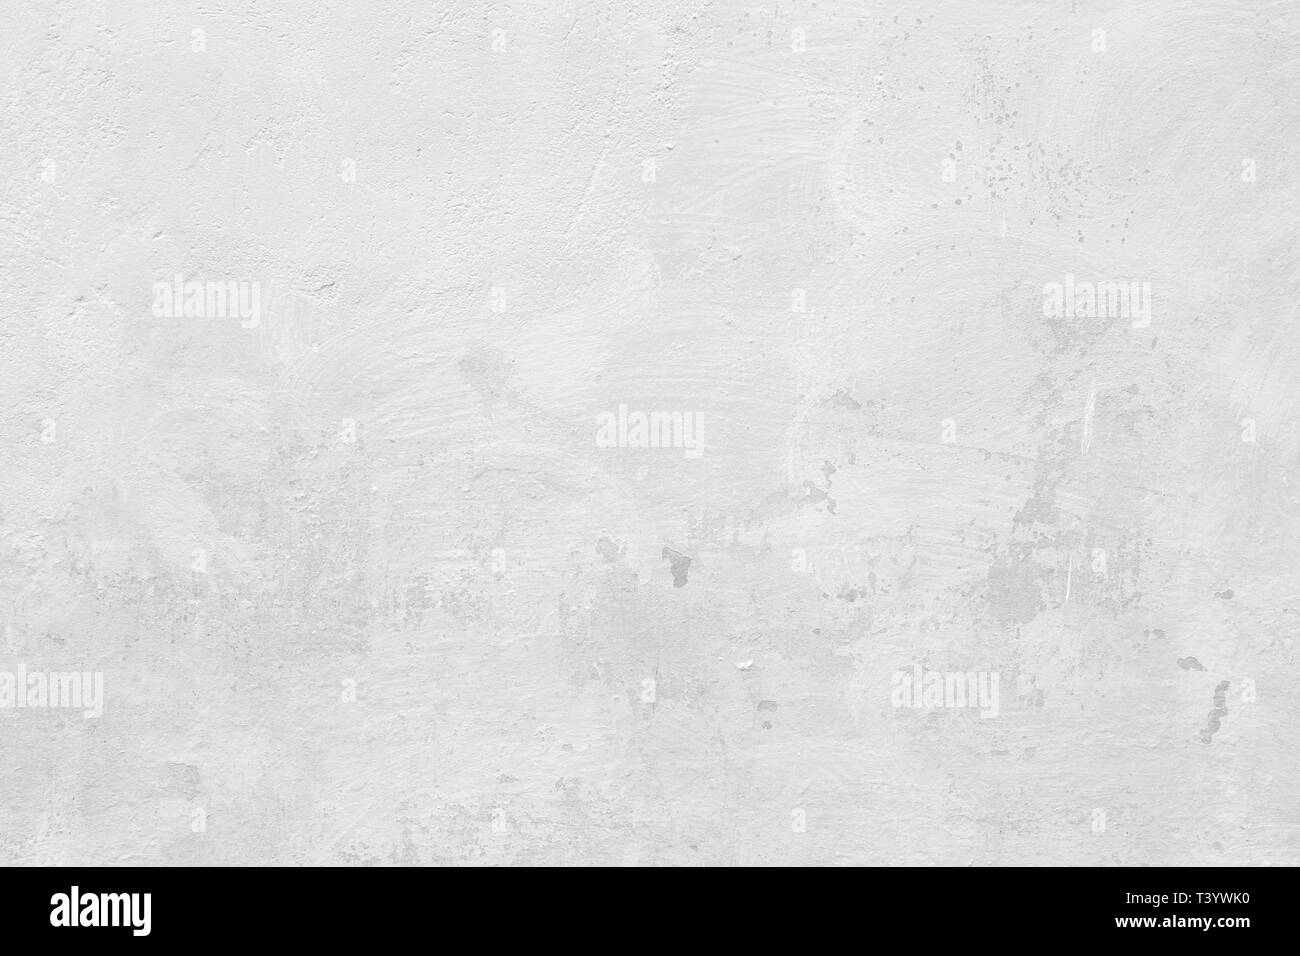 Close-up of a stone or concrete wall painted in white, paint slightly peeled off. Full frame texture background in black and white. Stock Photo